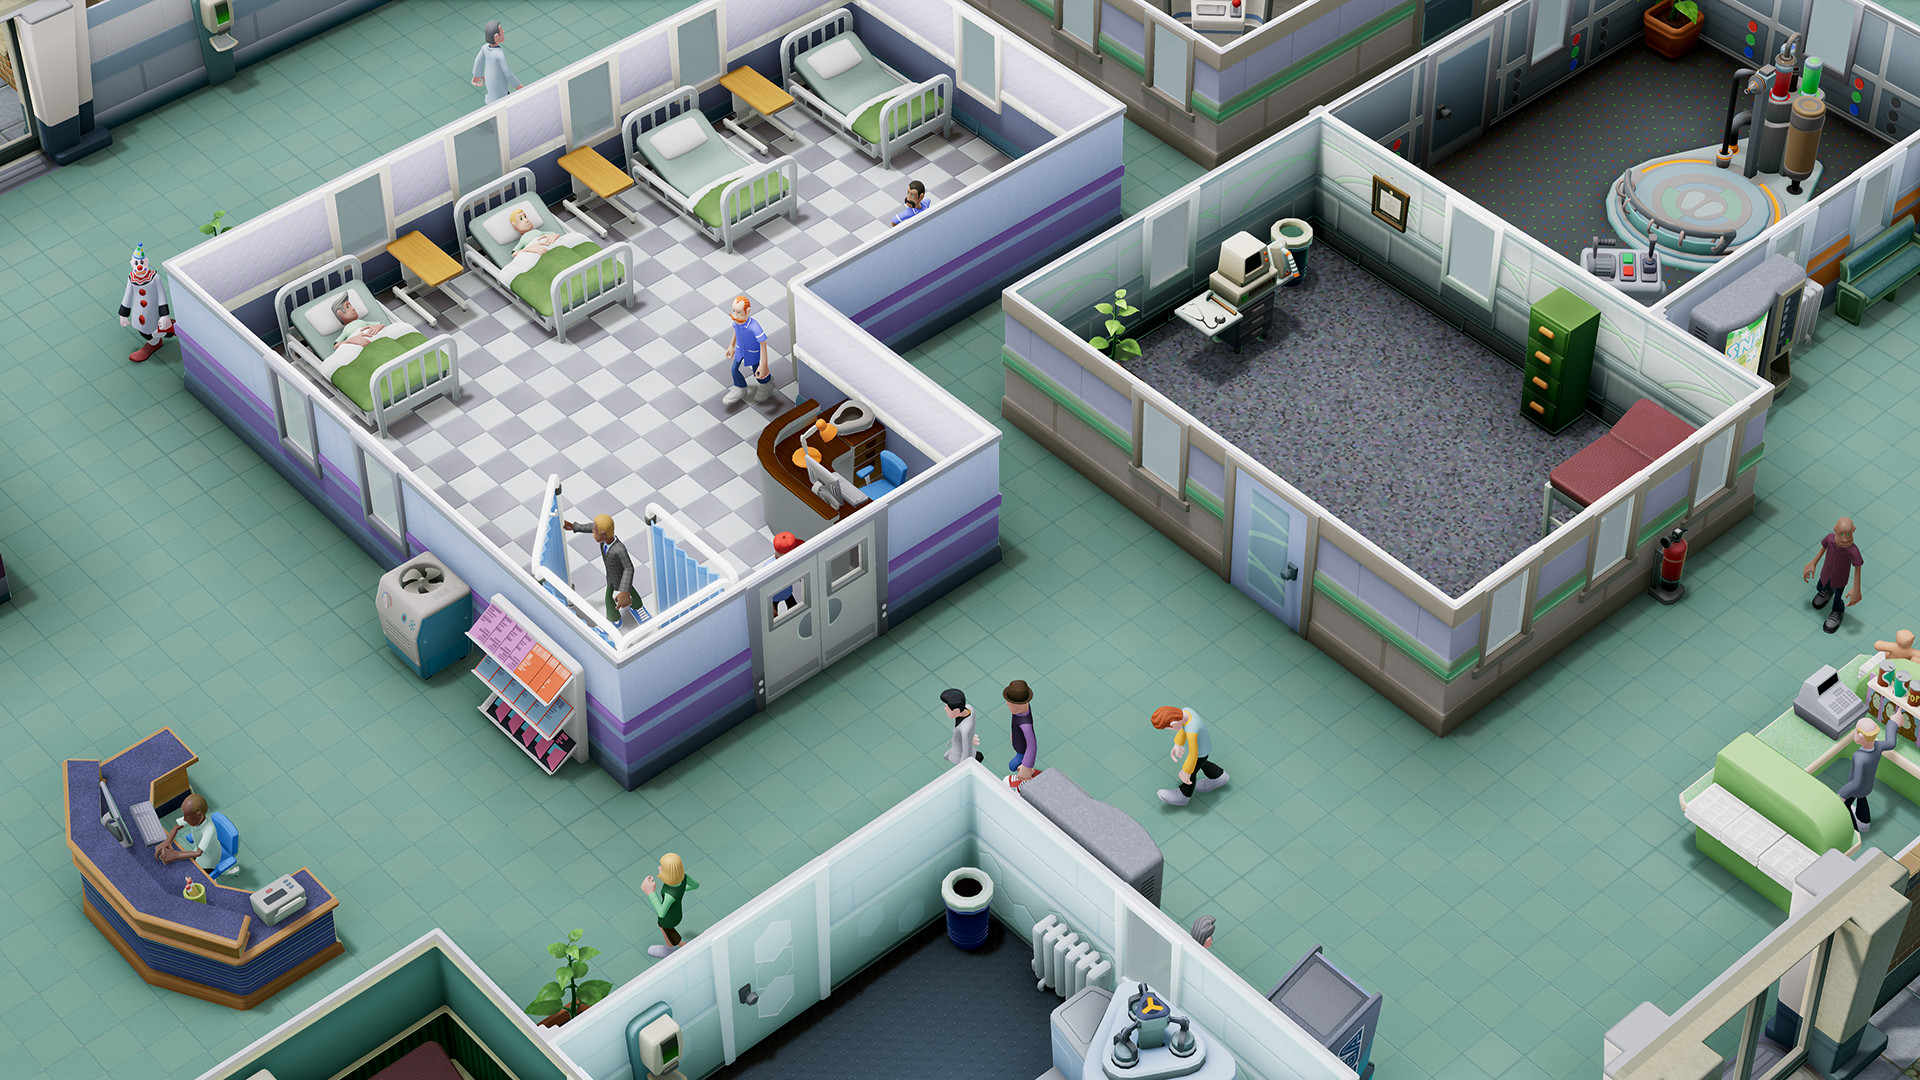 two point hospital pc